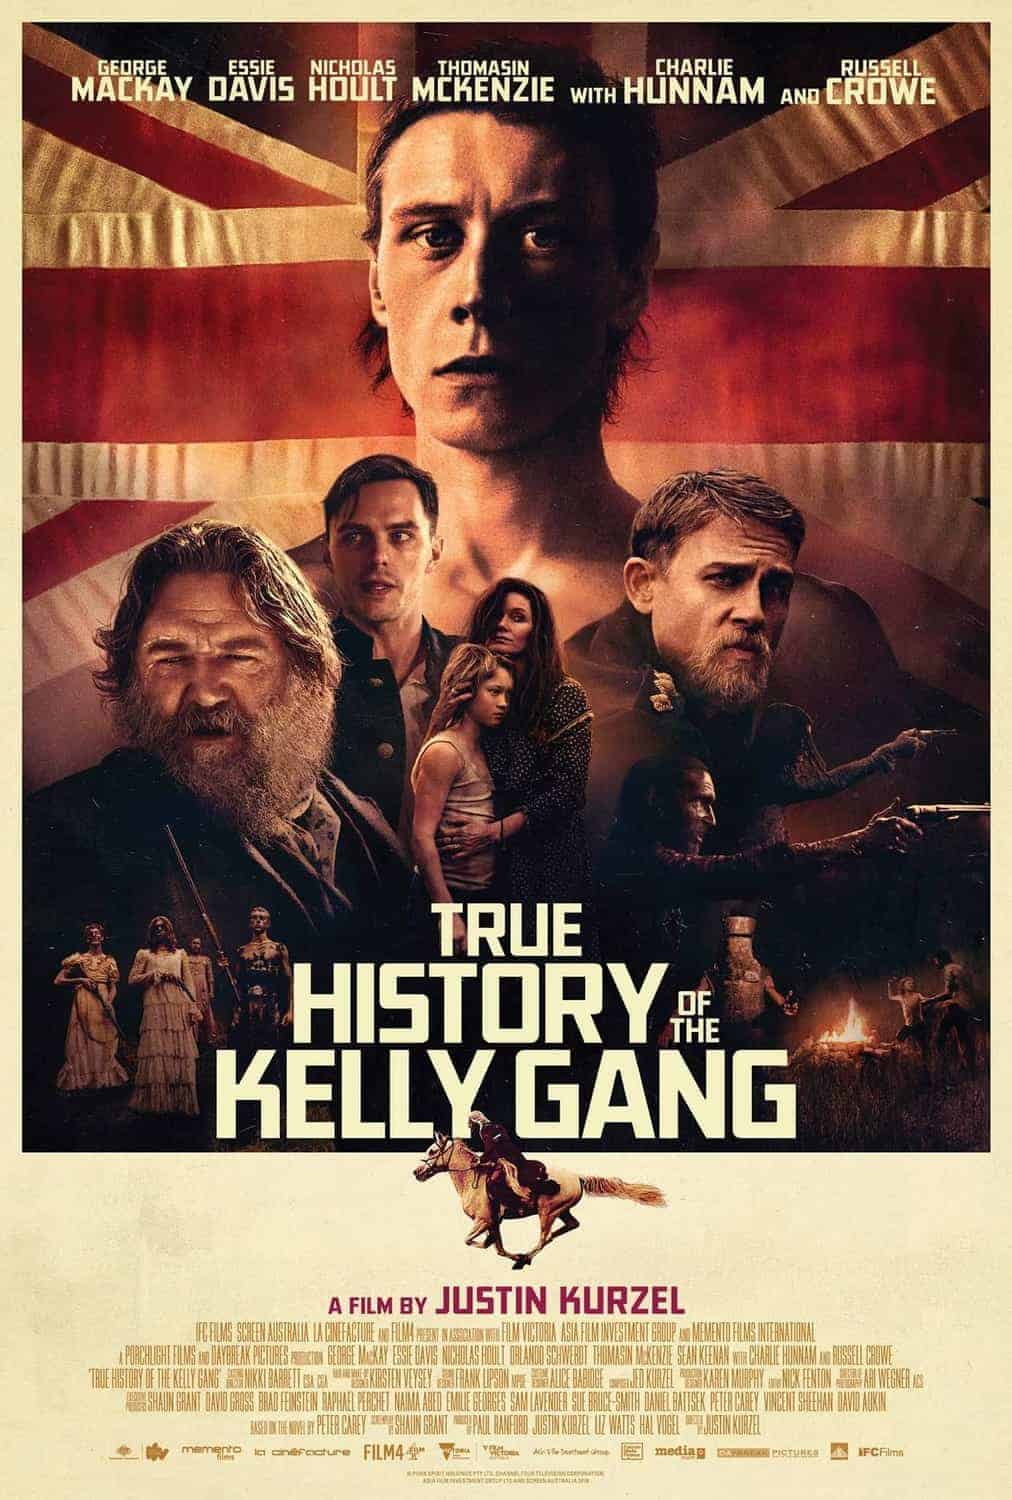 True History of the Kelly Gang IFC film review 2